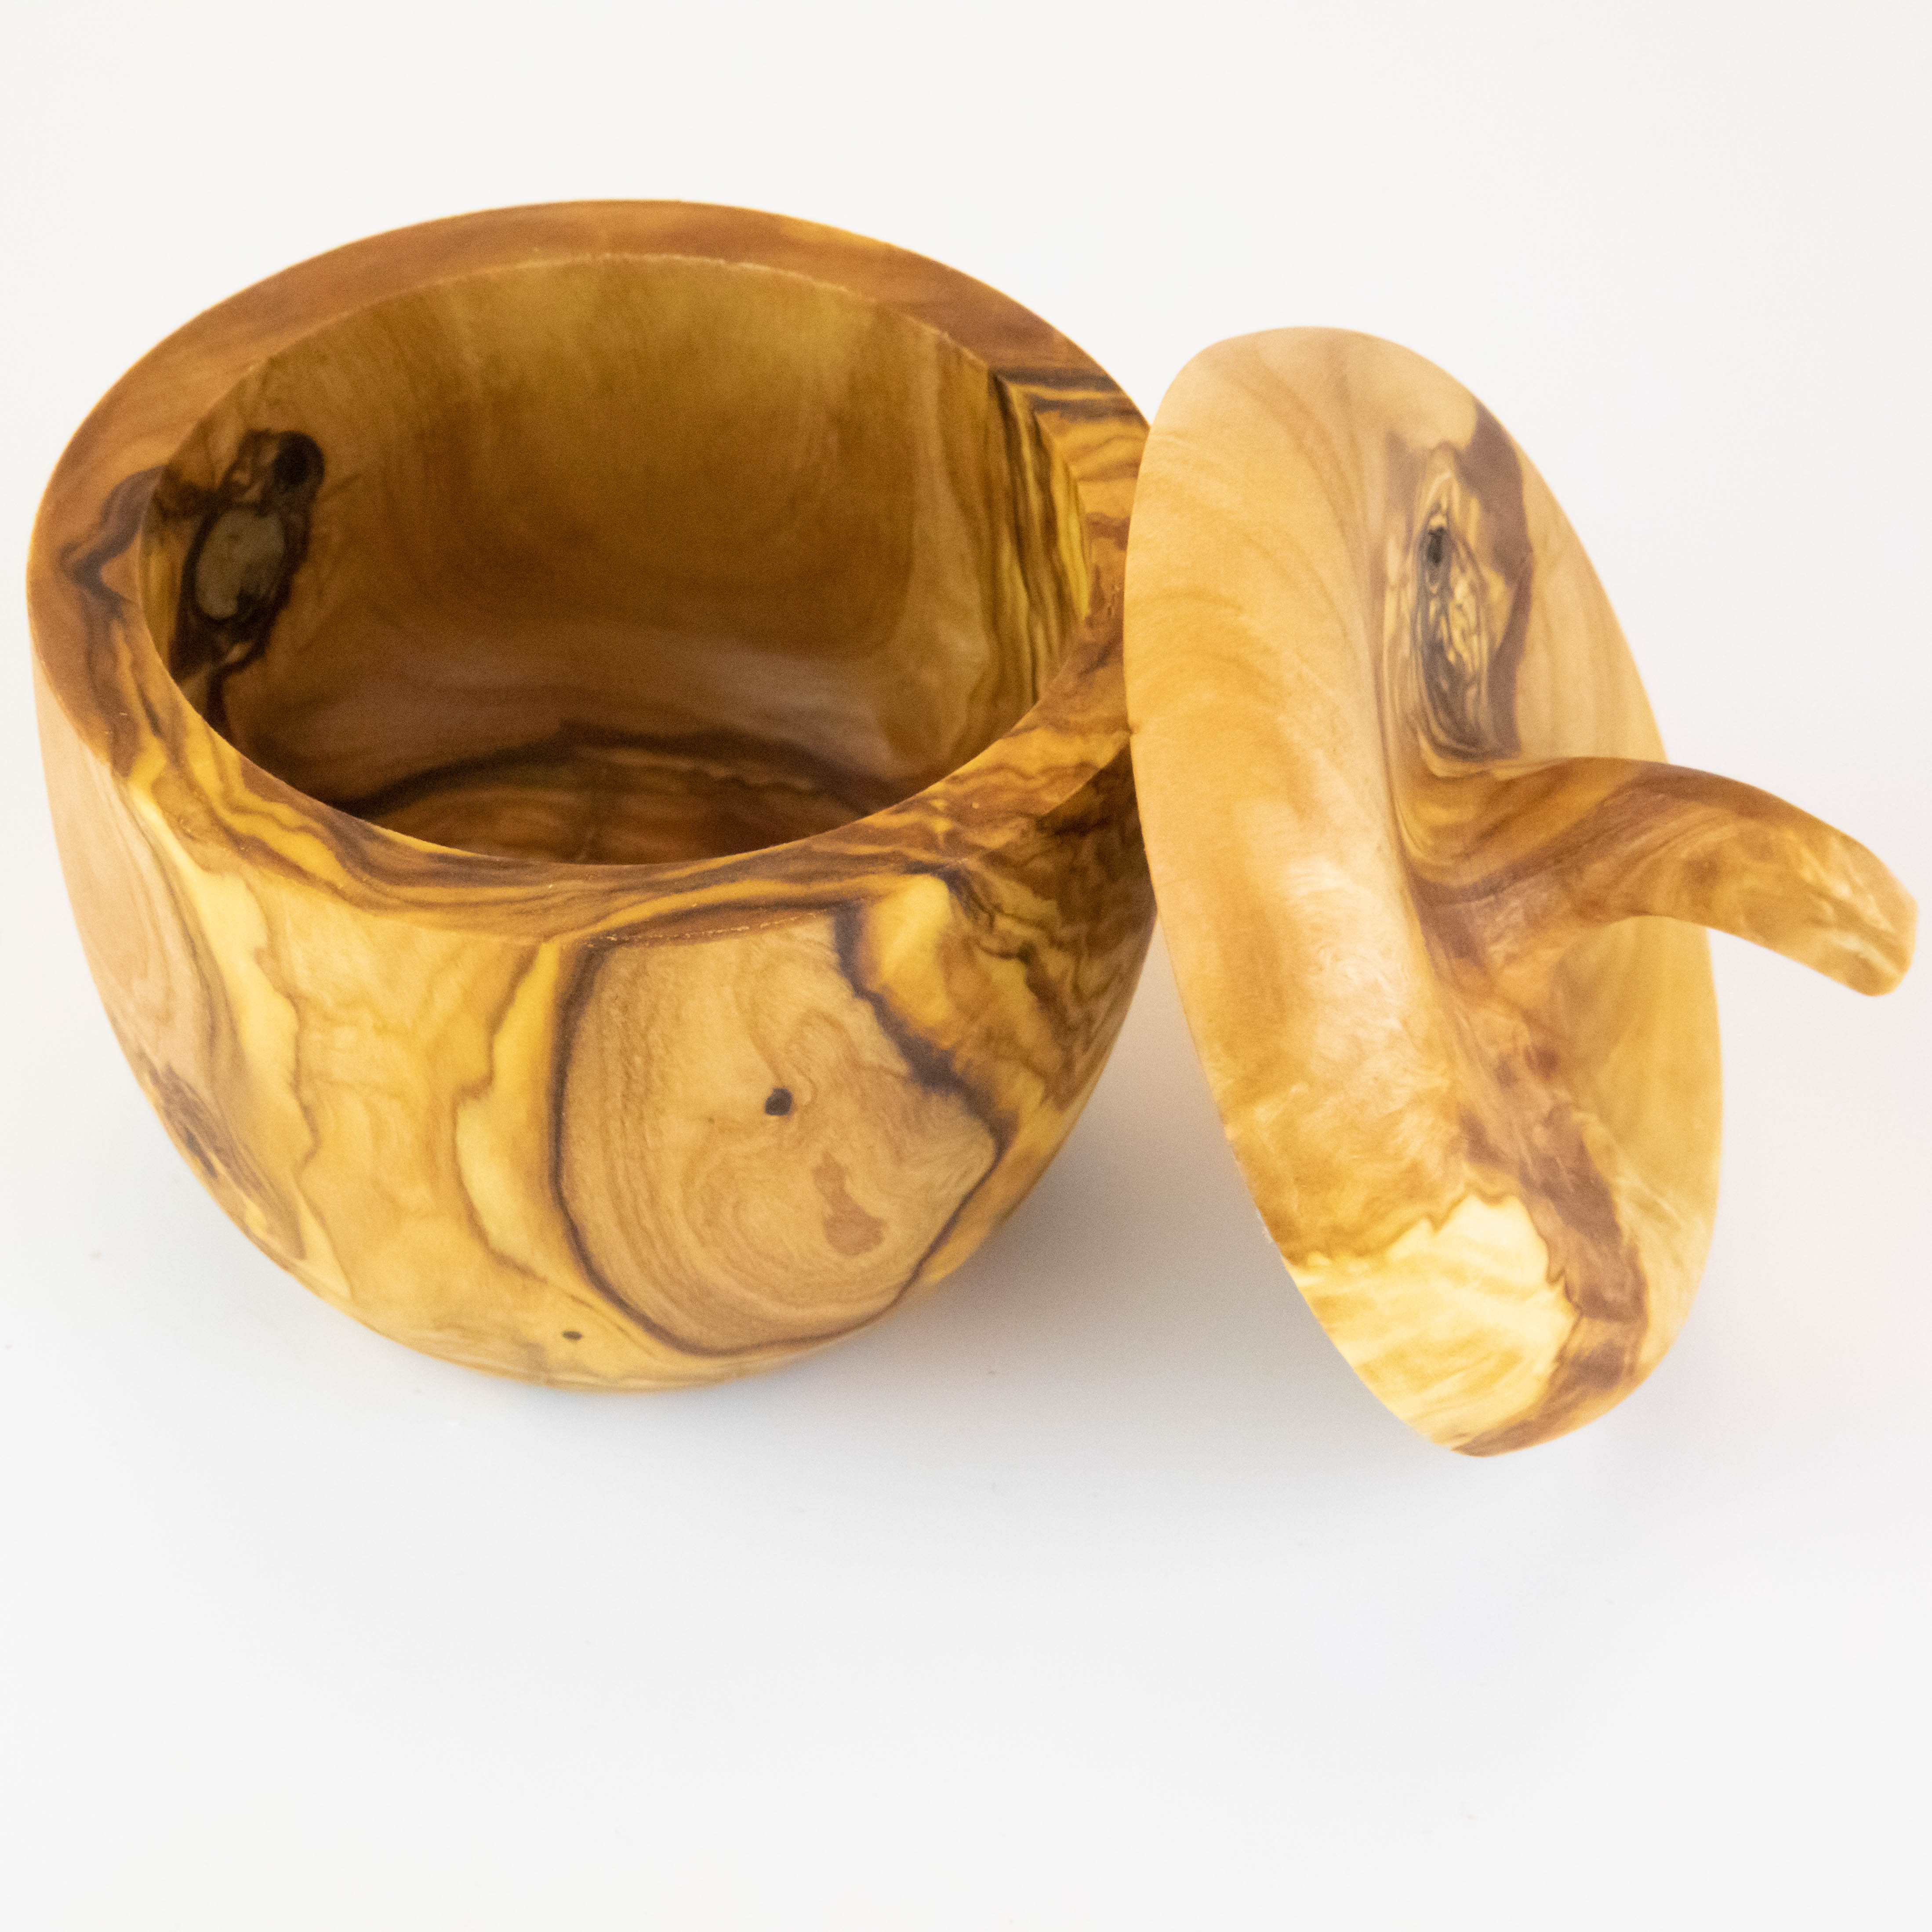 Sugar bowl made of olive wood with pointed lid.